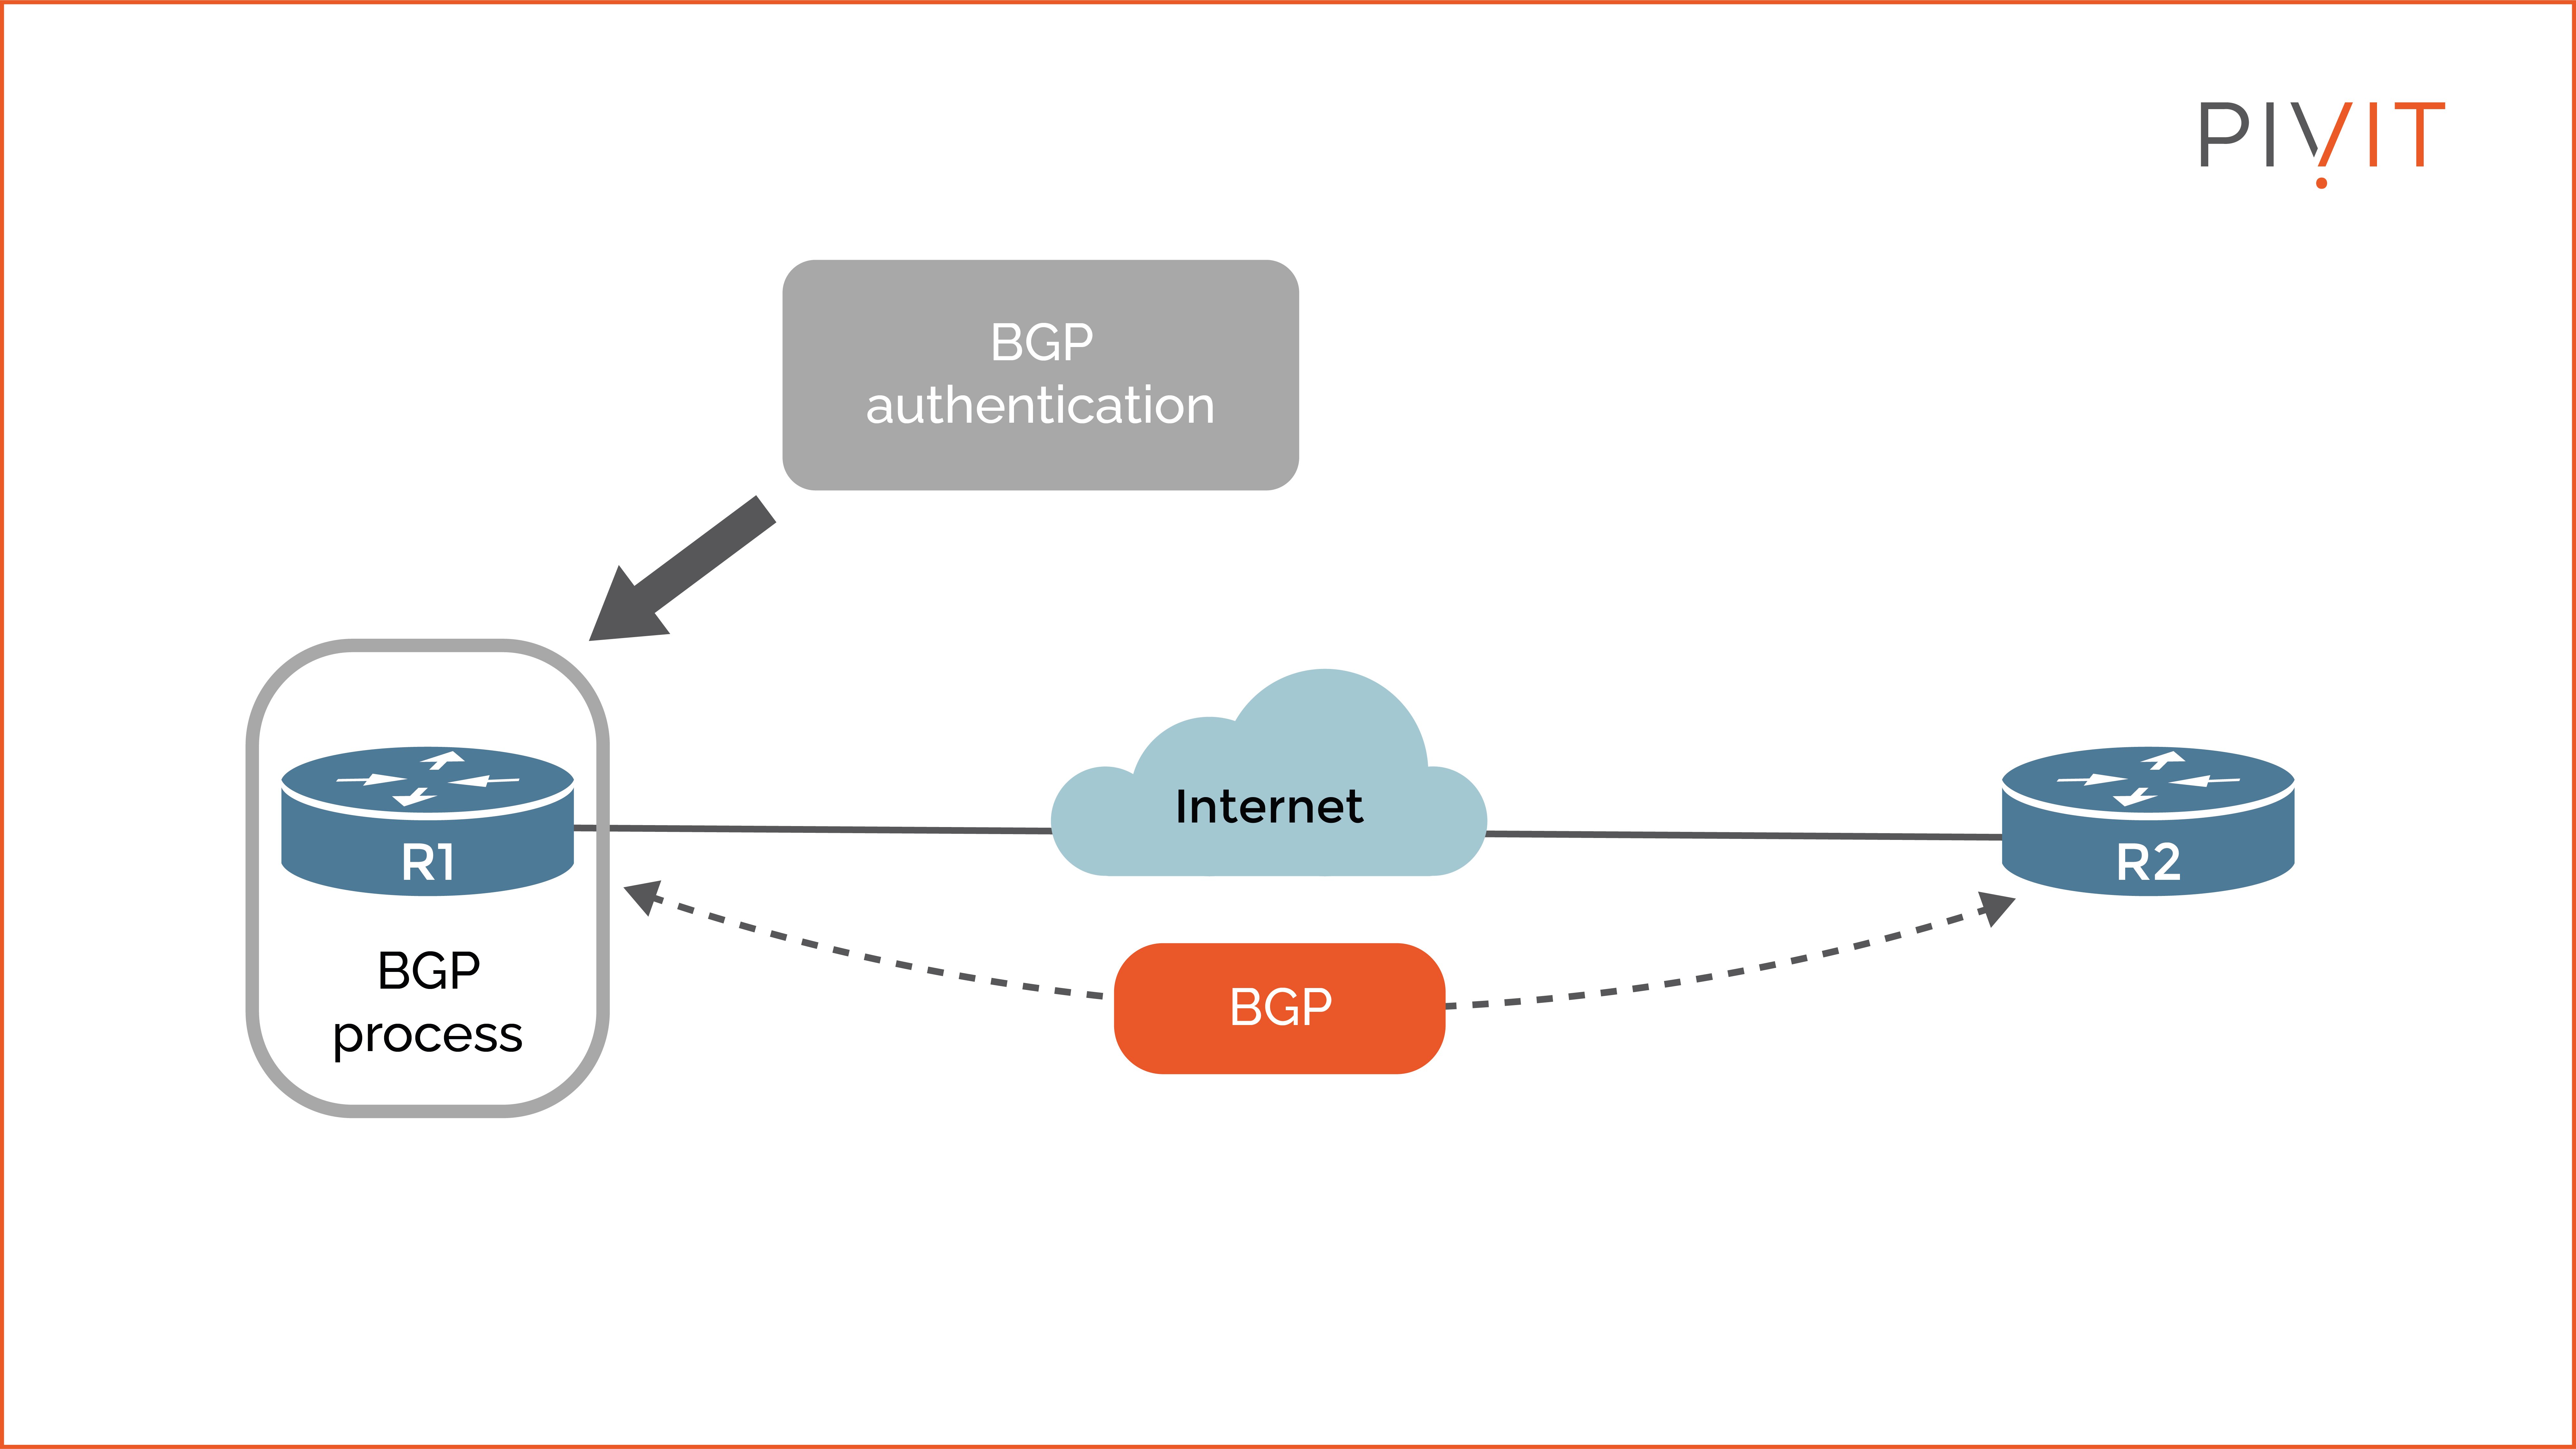 Implementing BGP authentication on R1